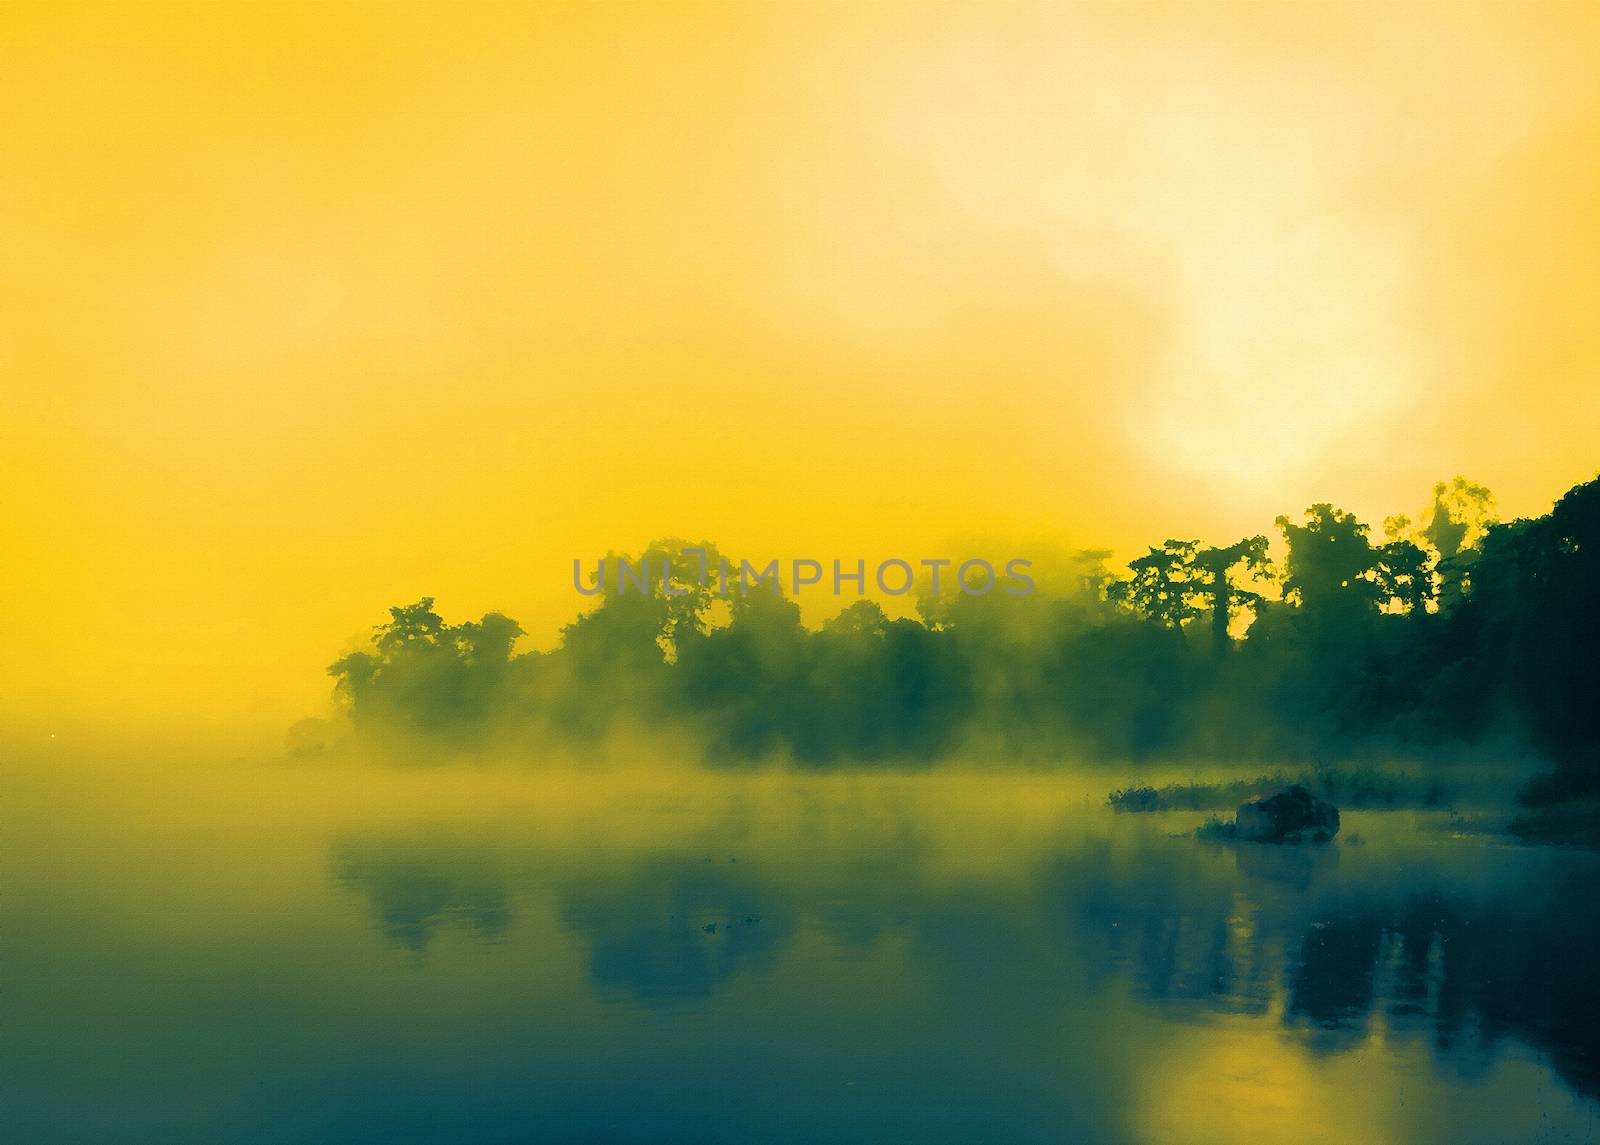 Sunrise in the Mist on lake and reflection on the water.